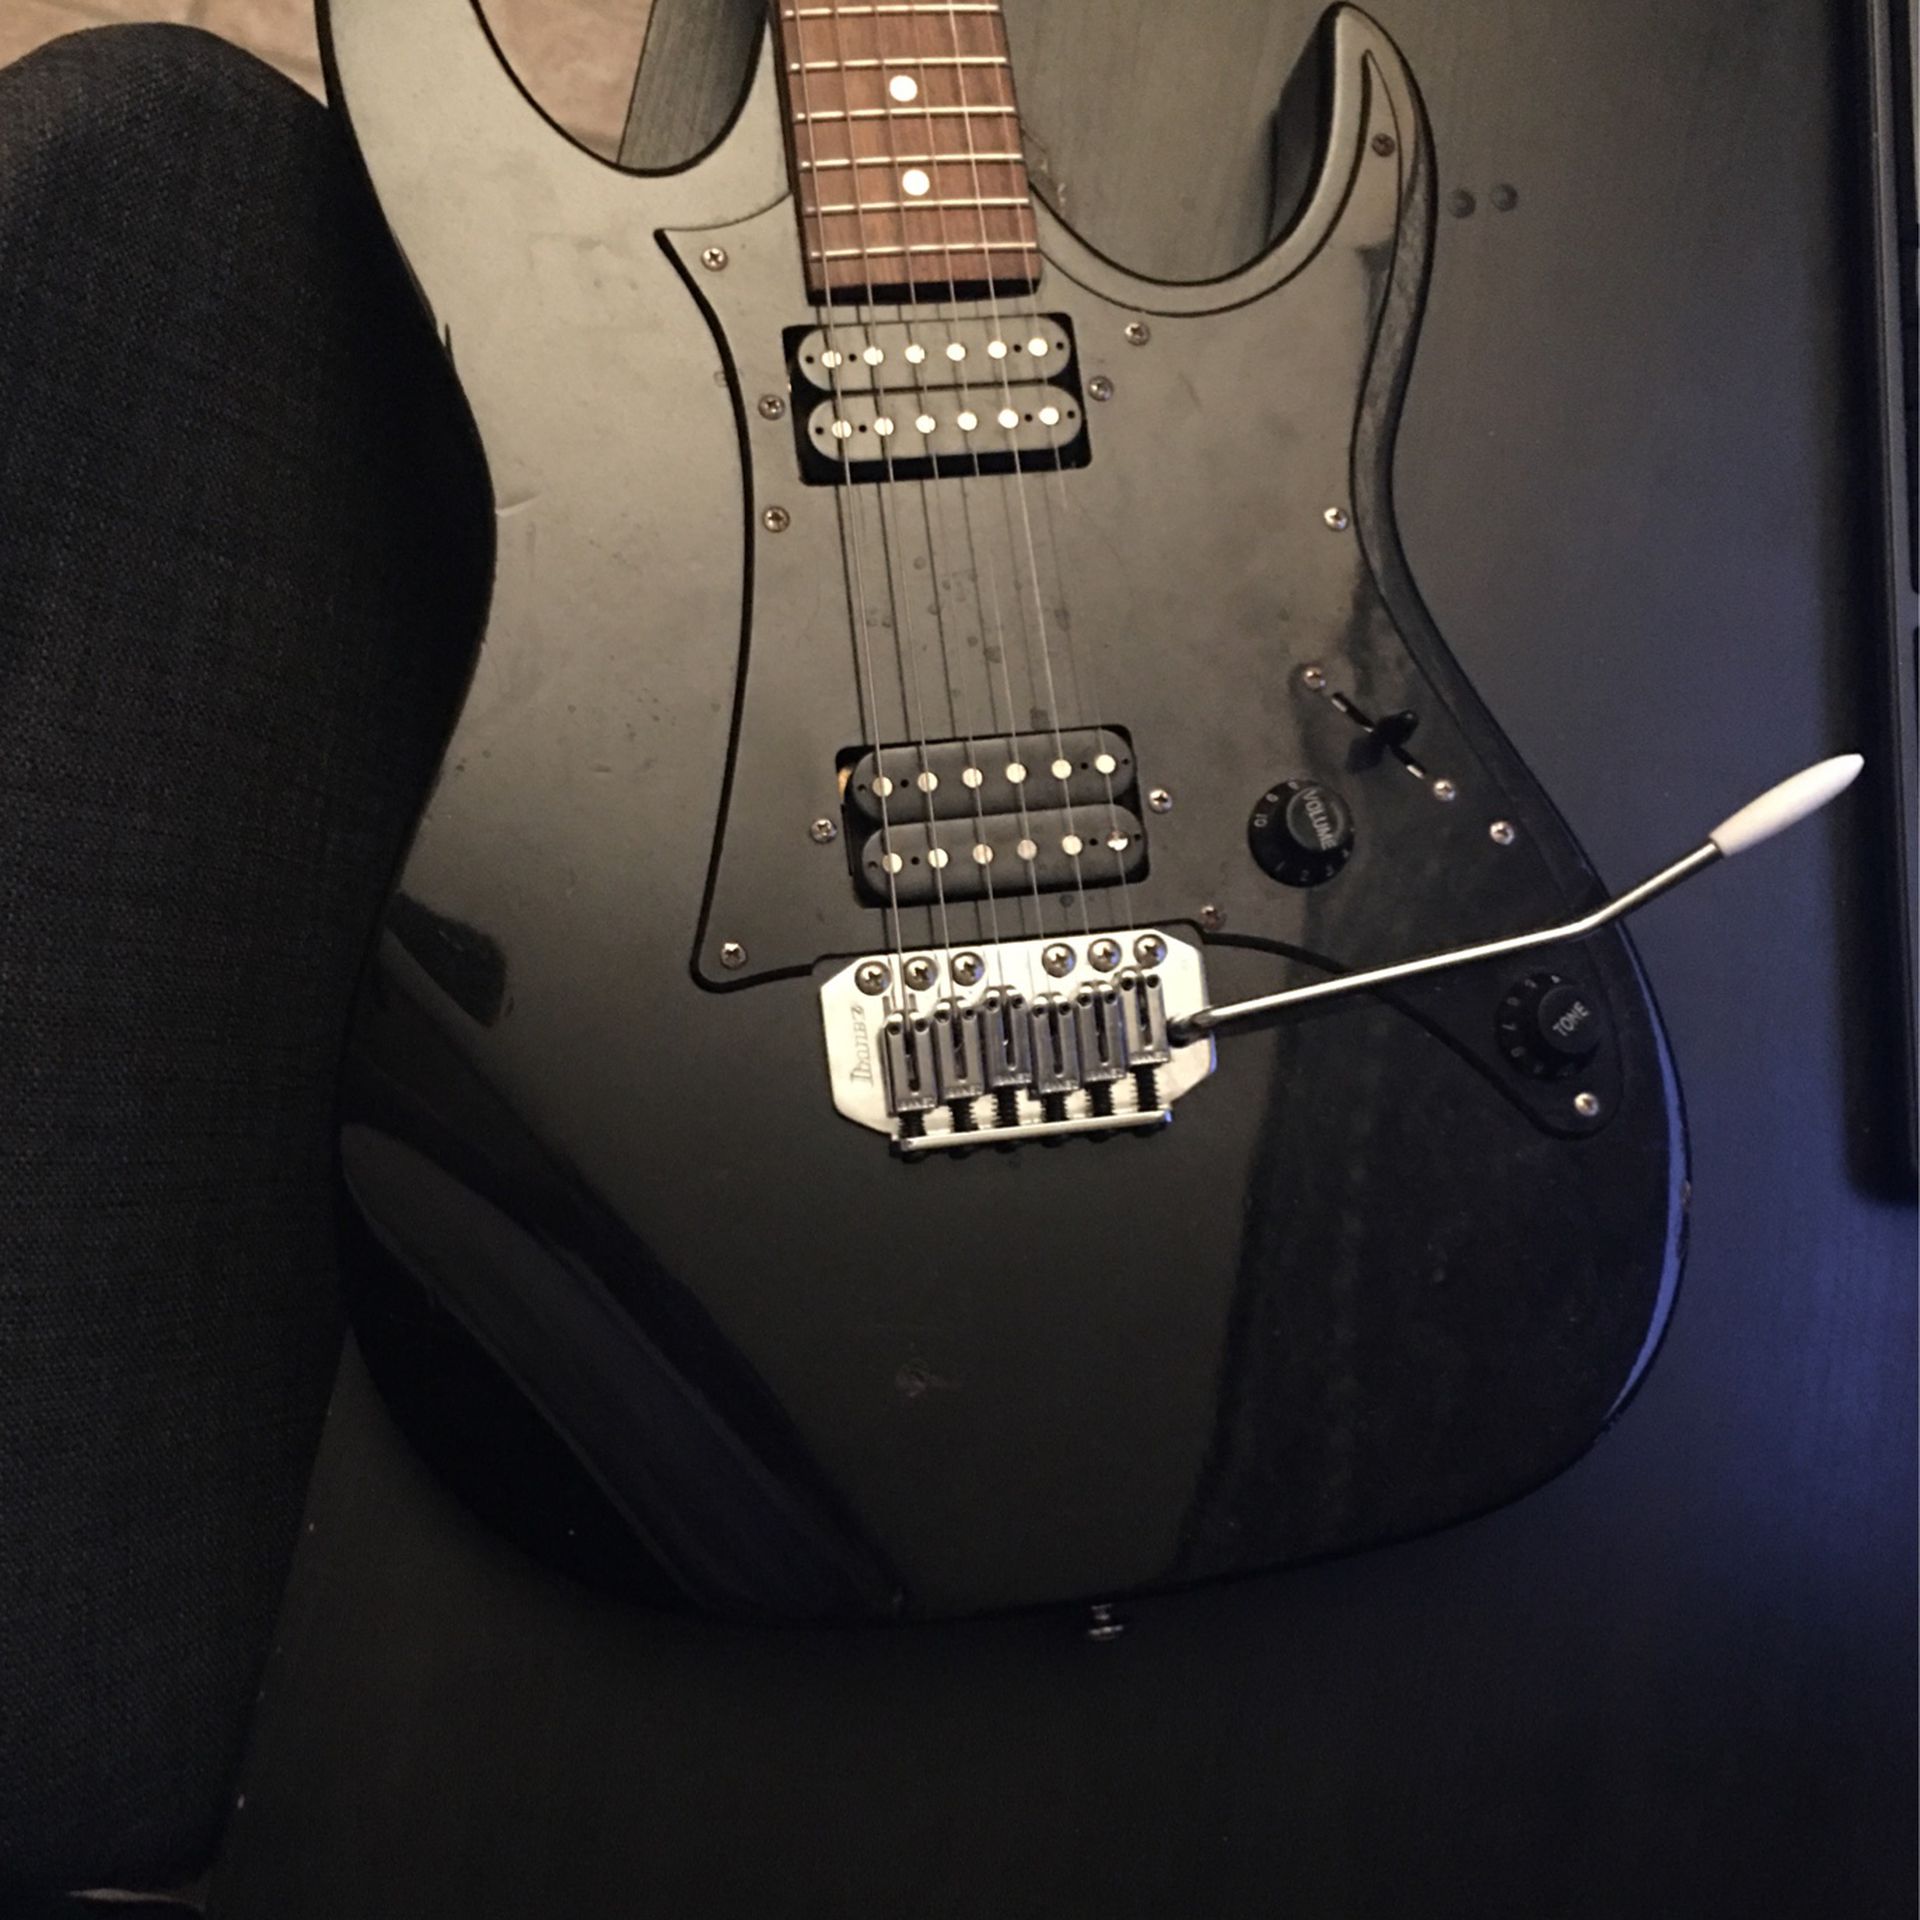 Ibanez Gio for Sale in Miami, FL   OfferUp